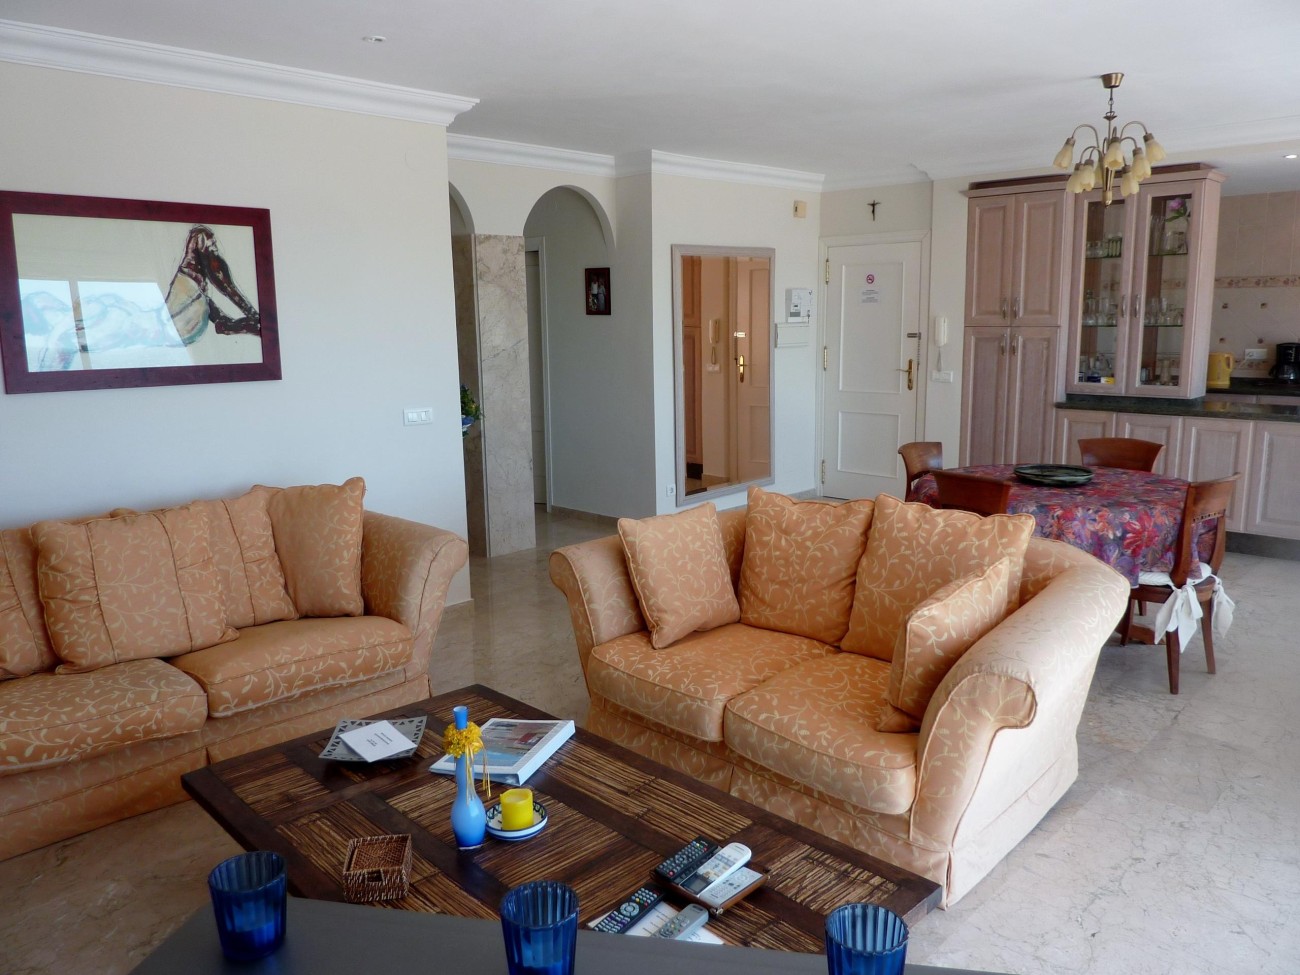 Penthouse for sale in Nerja 5